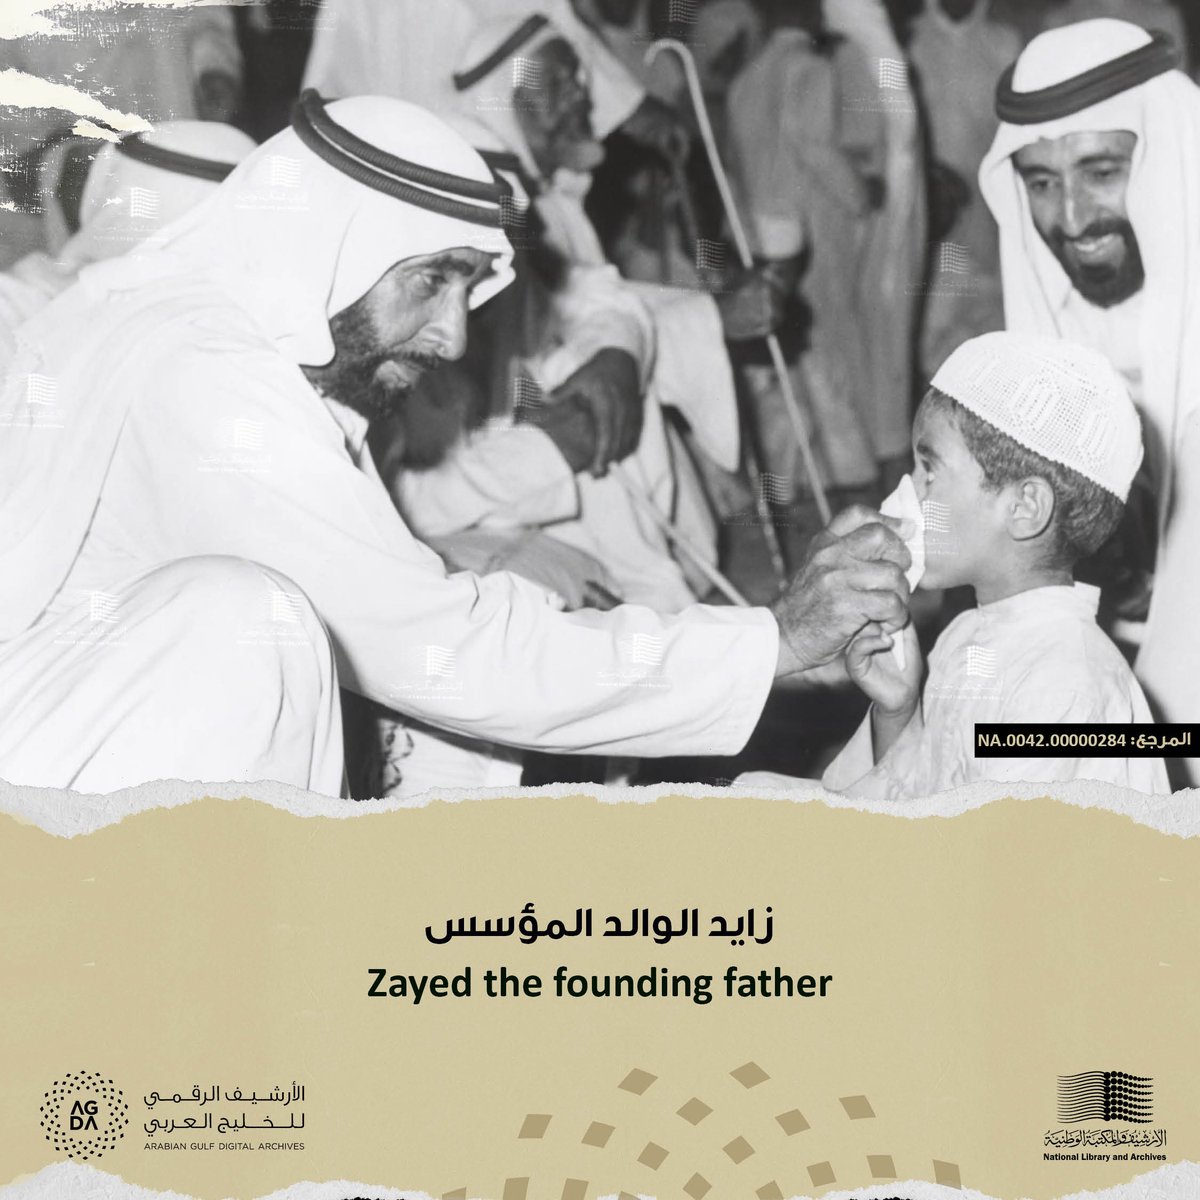 The founding father paid great attention to children, he was compassionate towards then and keen to spend time with them. In the photo, the late, Sheikh Zayed bin Sultan Al Nahyan, during his meeting with citizens in Ghayathi, in 1976.

#nlauae #NationalLibraryandArchives #AGDA